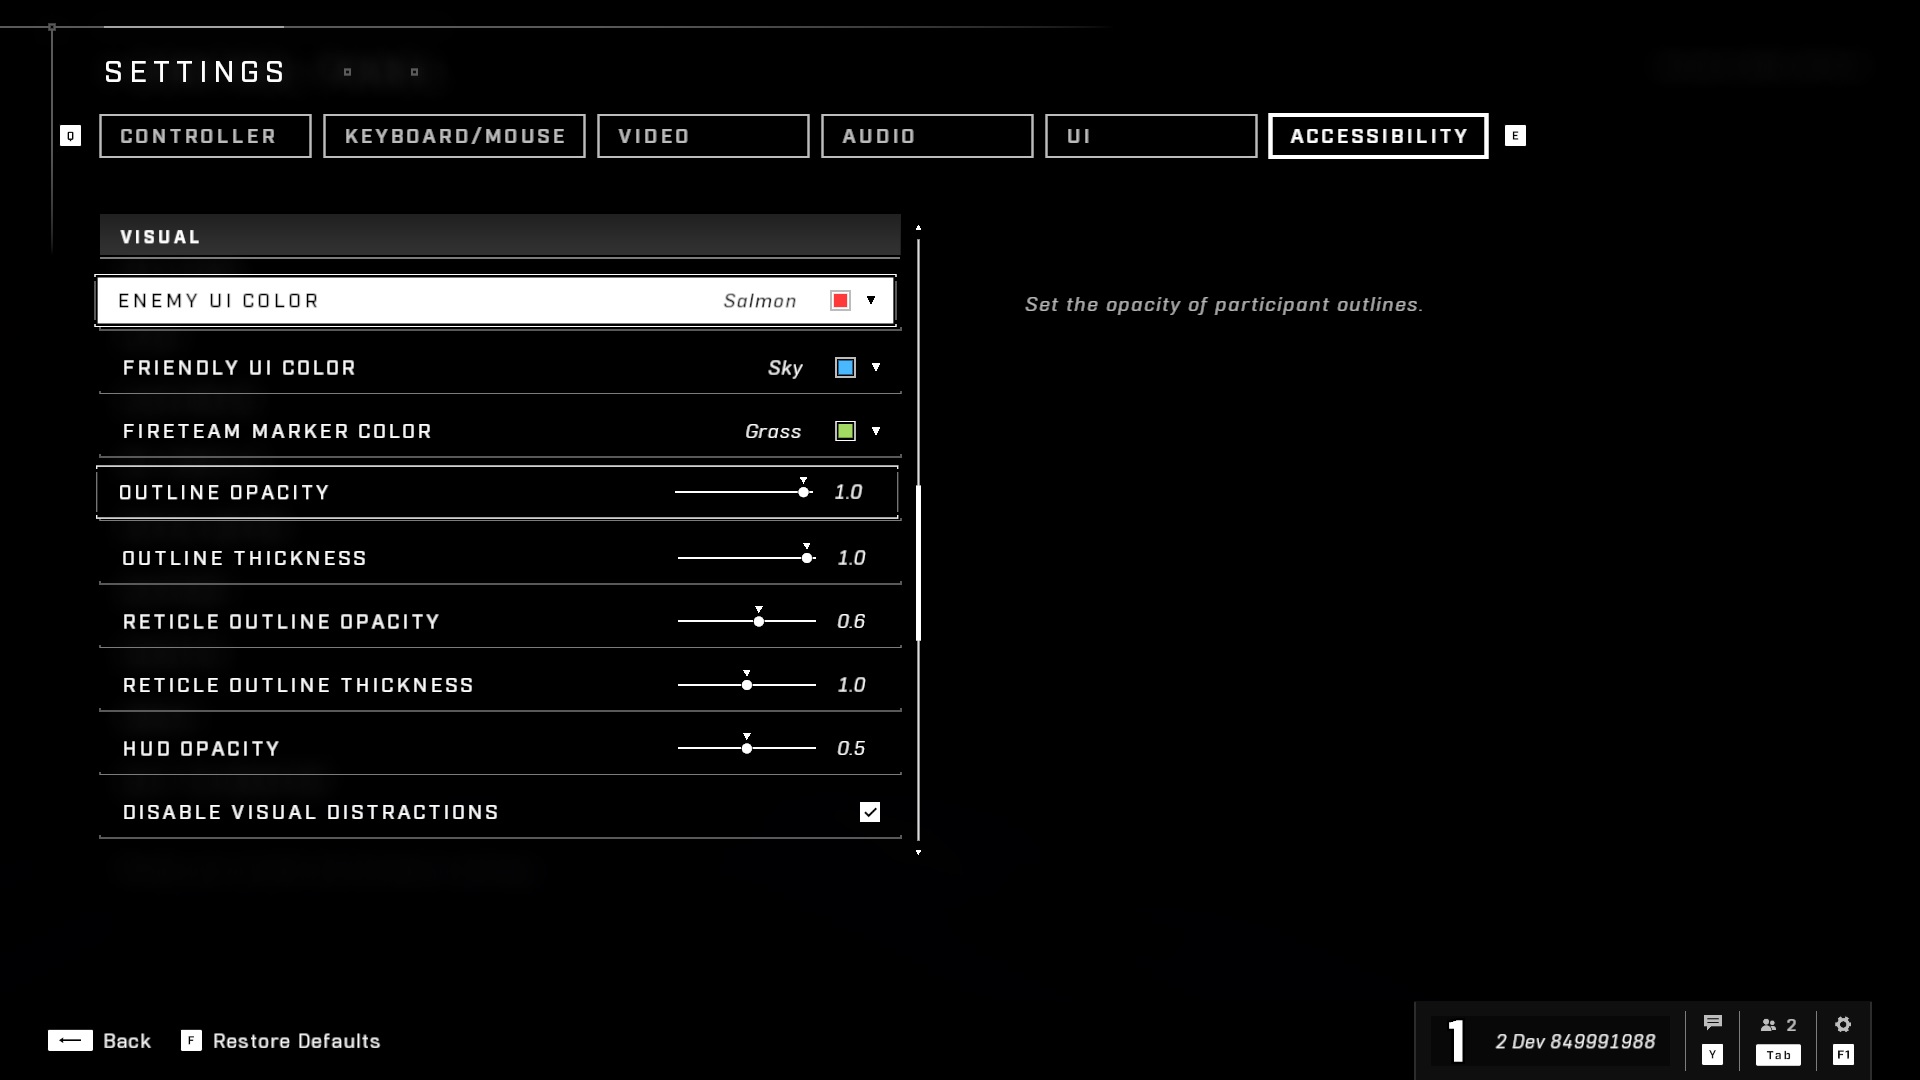 Screenshot of Halo Infinite game settings related to Accessibility. Showing Visual related setting called Enemy UI Color set to color salmon.